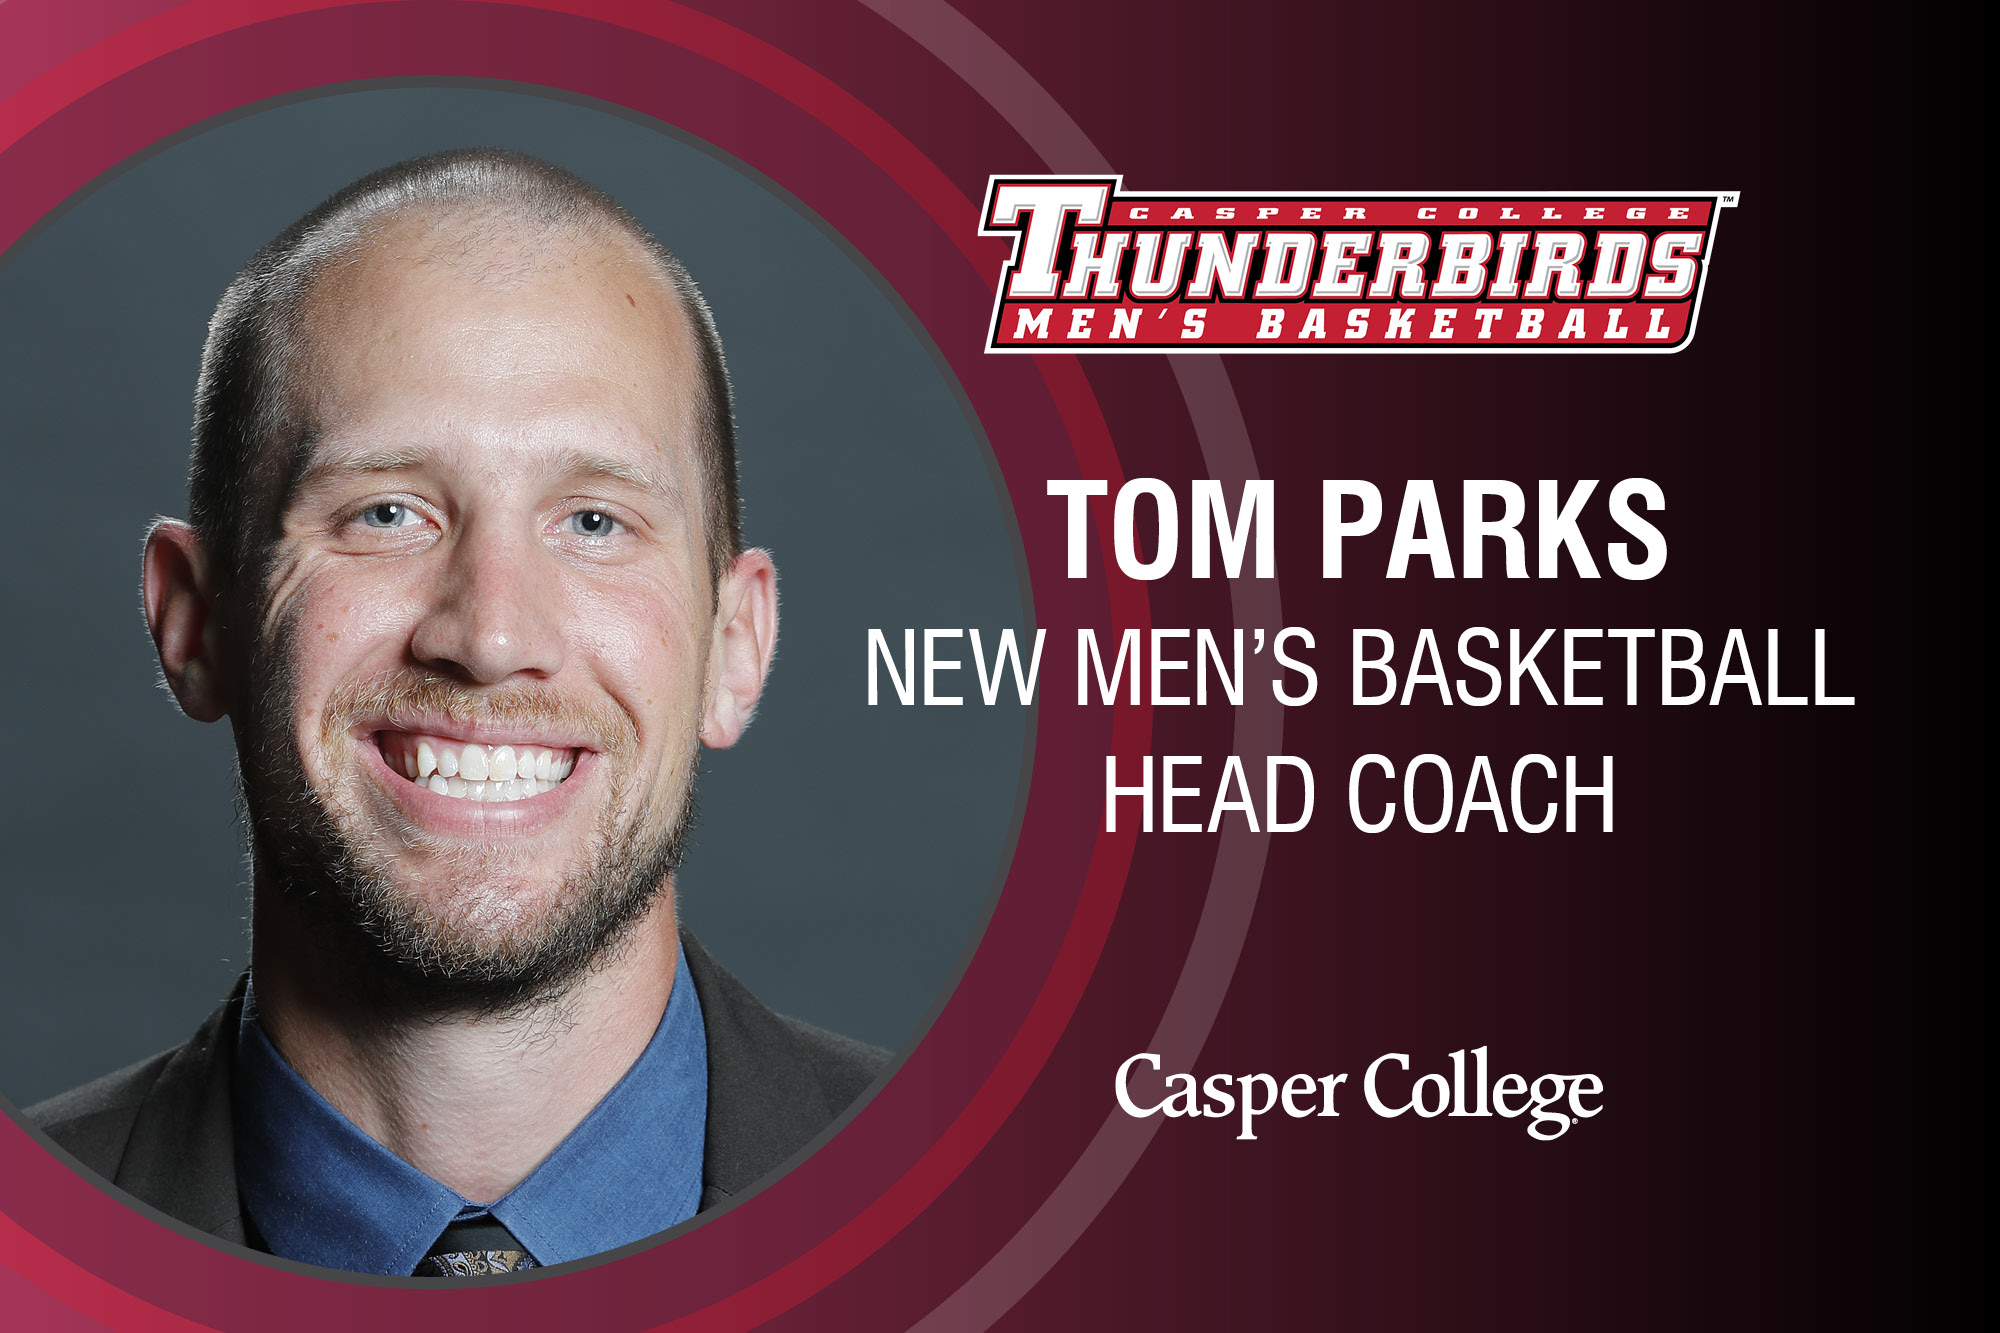 Image of Tom Parks for press release.